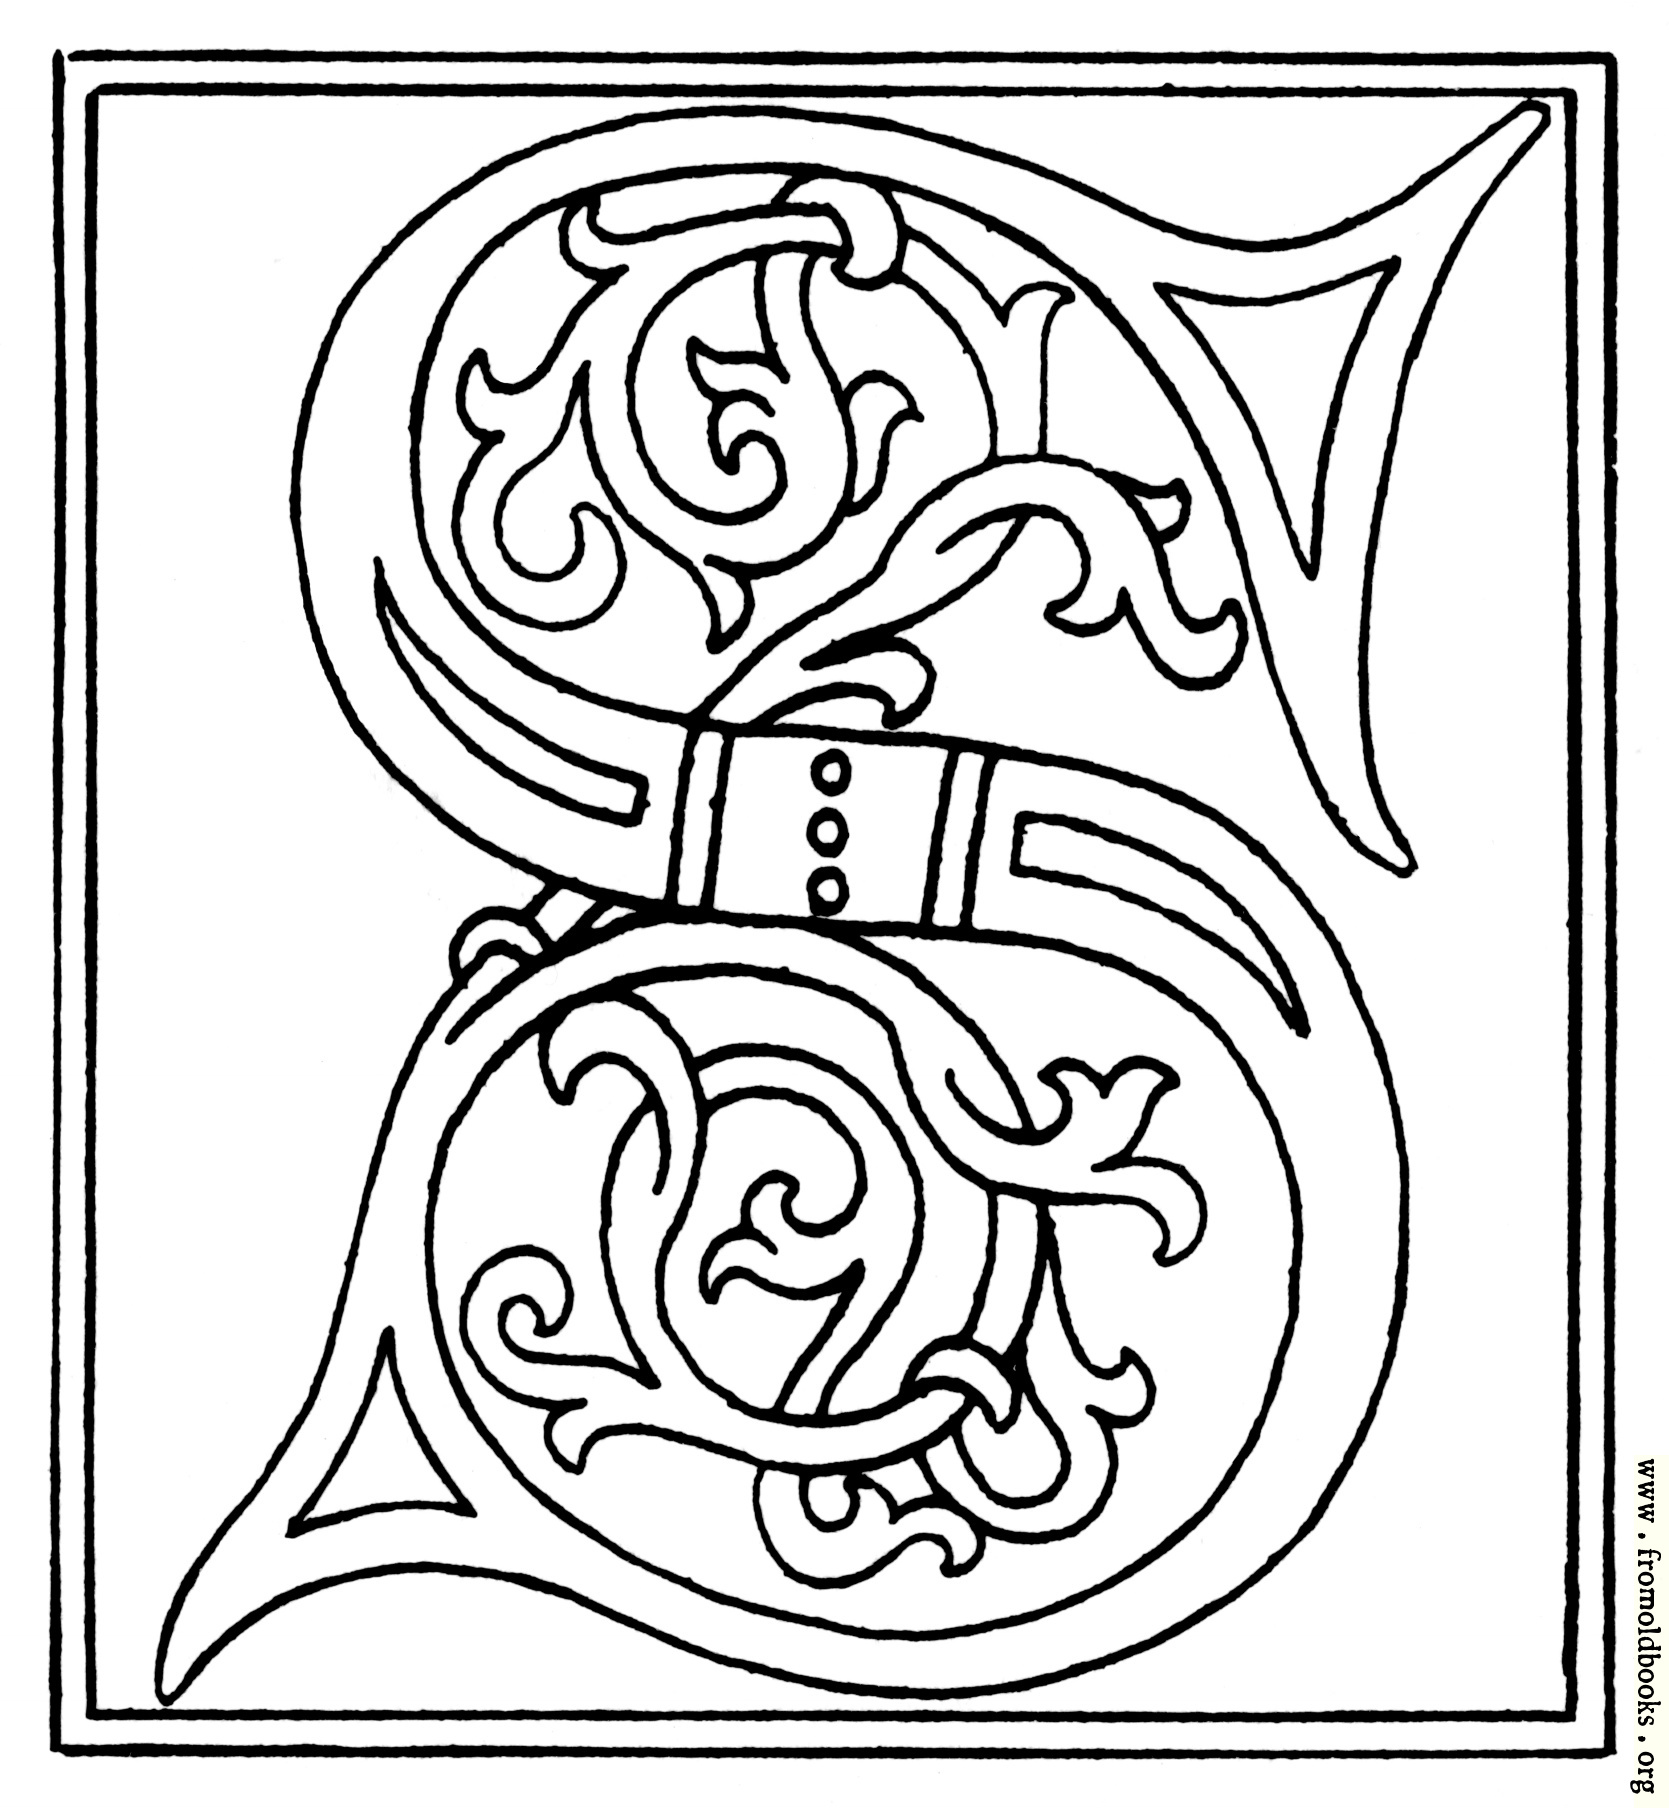 FOBO Clipart Initial Letter S From Late 15th Century Printed Book